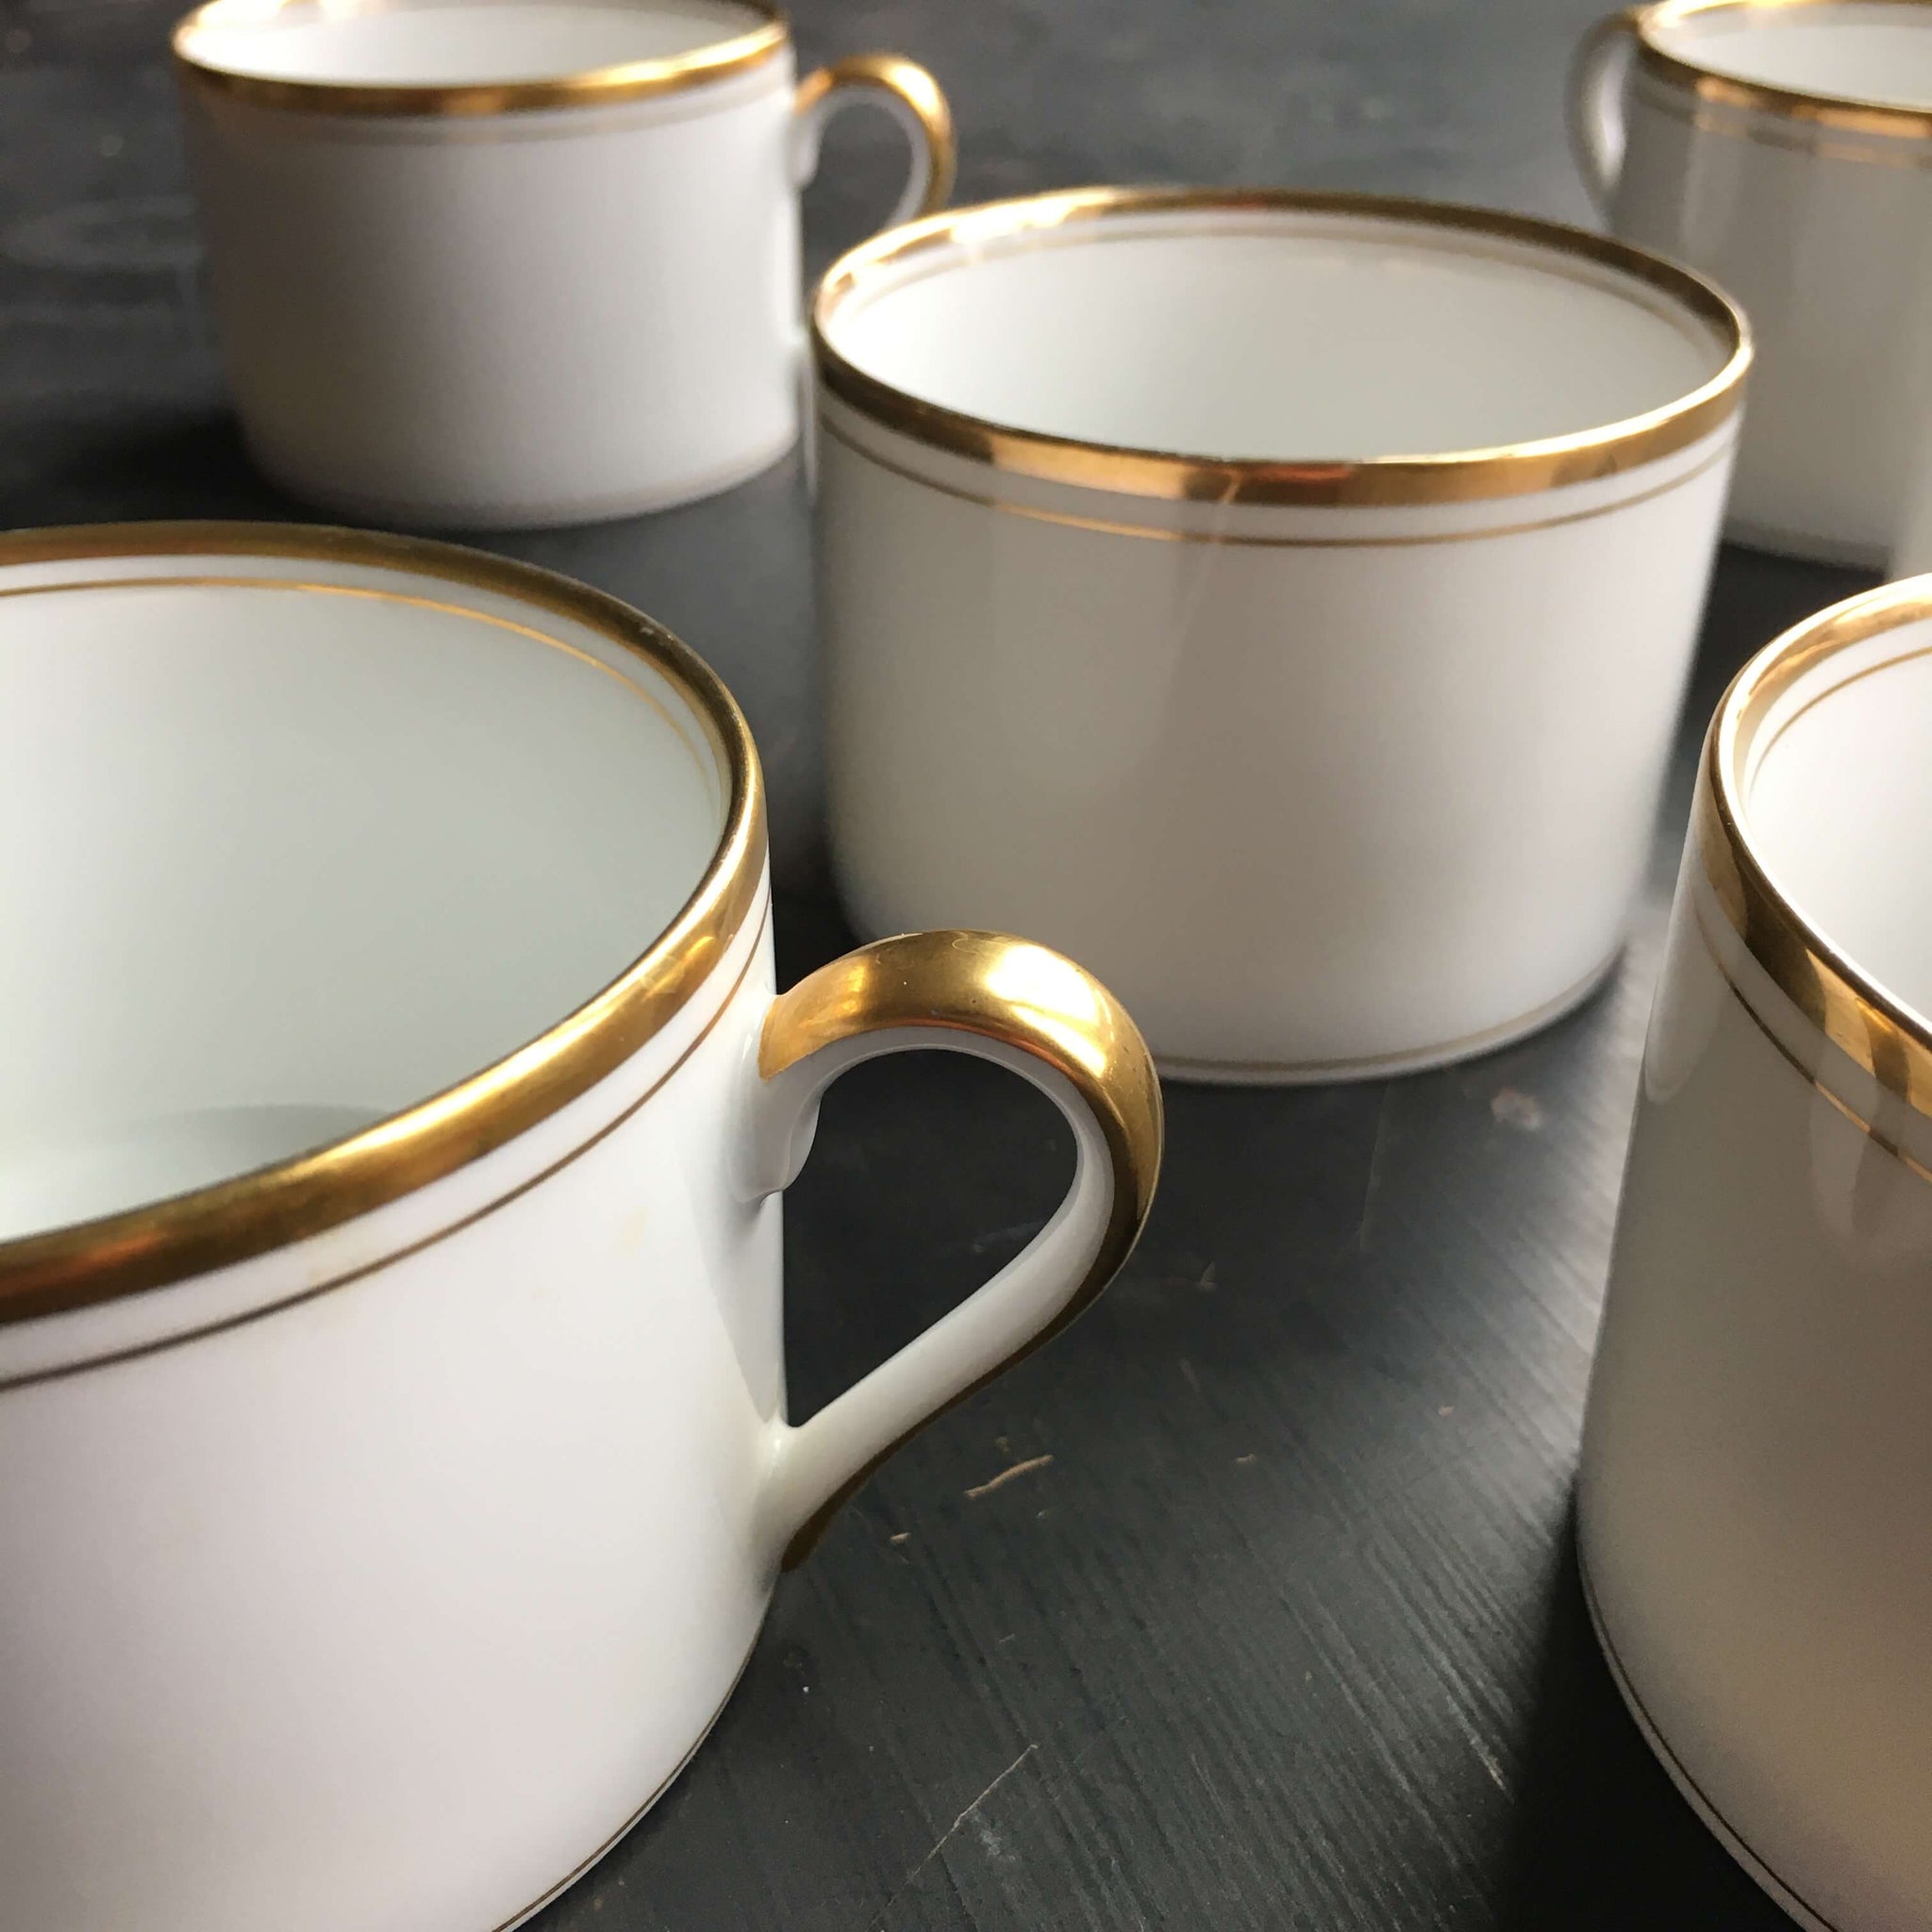 Vintage 1970's Fitz & Floyd Palais Flat Cups - Set of 10 White & Gold Striped Cups